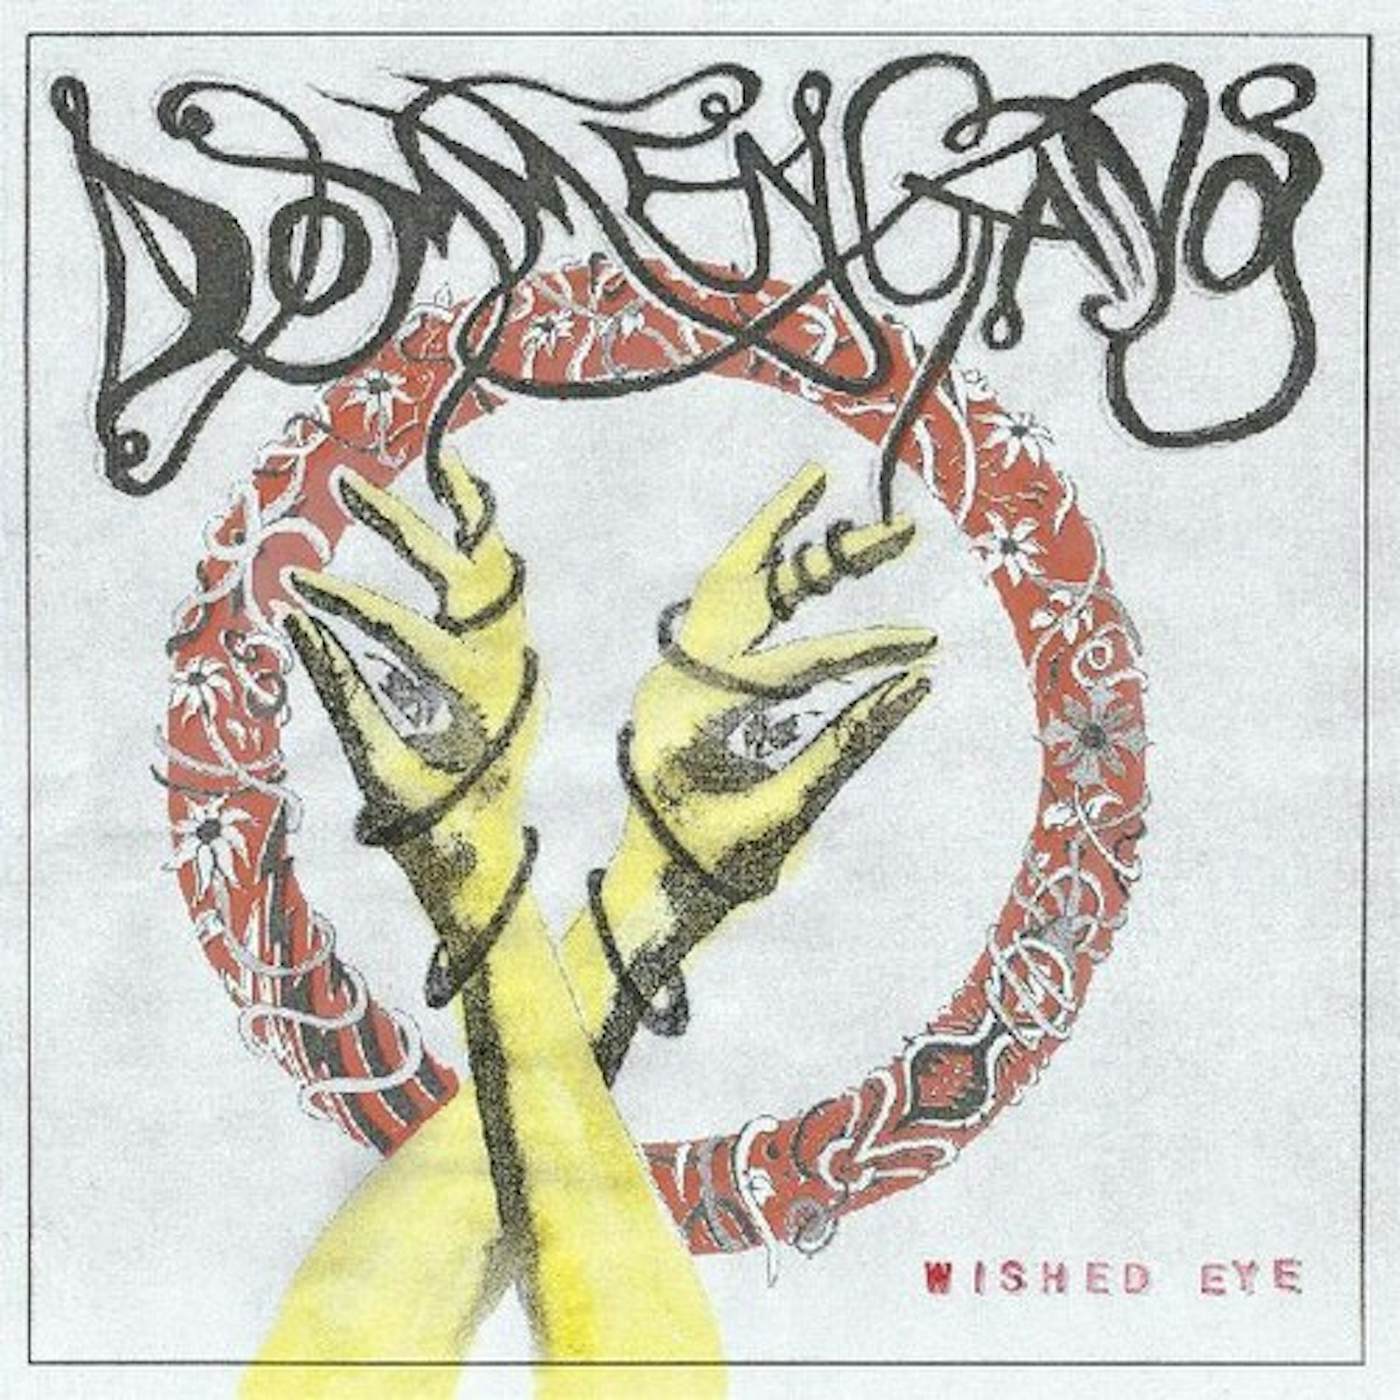 Dommengang WISHED EYE CD